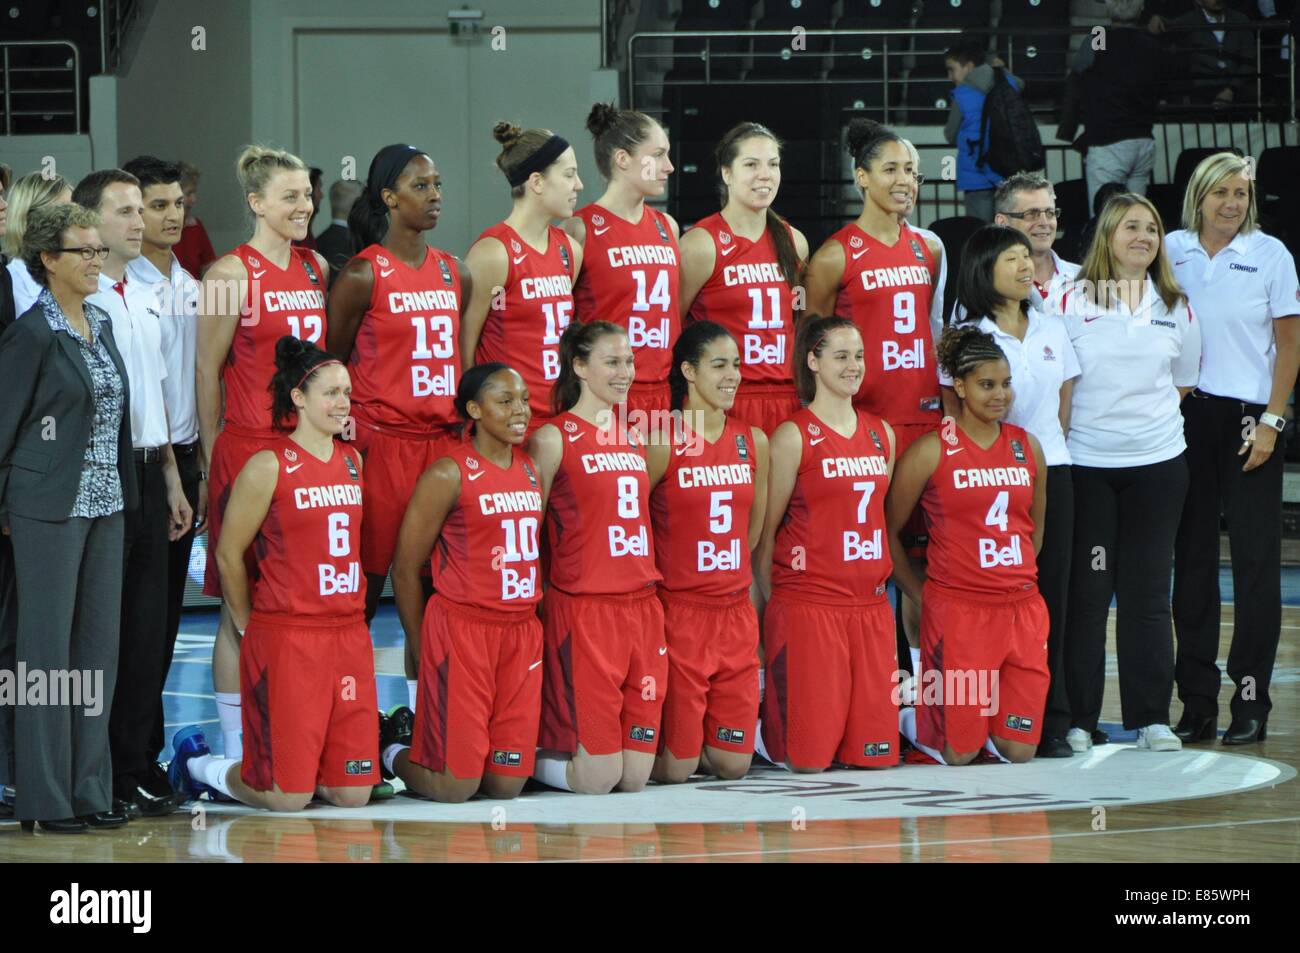 Canada team pose prior to the match against today's Czech Republic in indoor sporting arena Ankara Arena, in which these days are played 2014 FIBA World Championship for Women matches, Ankara, Turkey, on Monday September 30, 2014. (CTK Photo/David Svab) Stock Photo